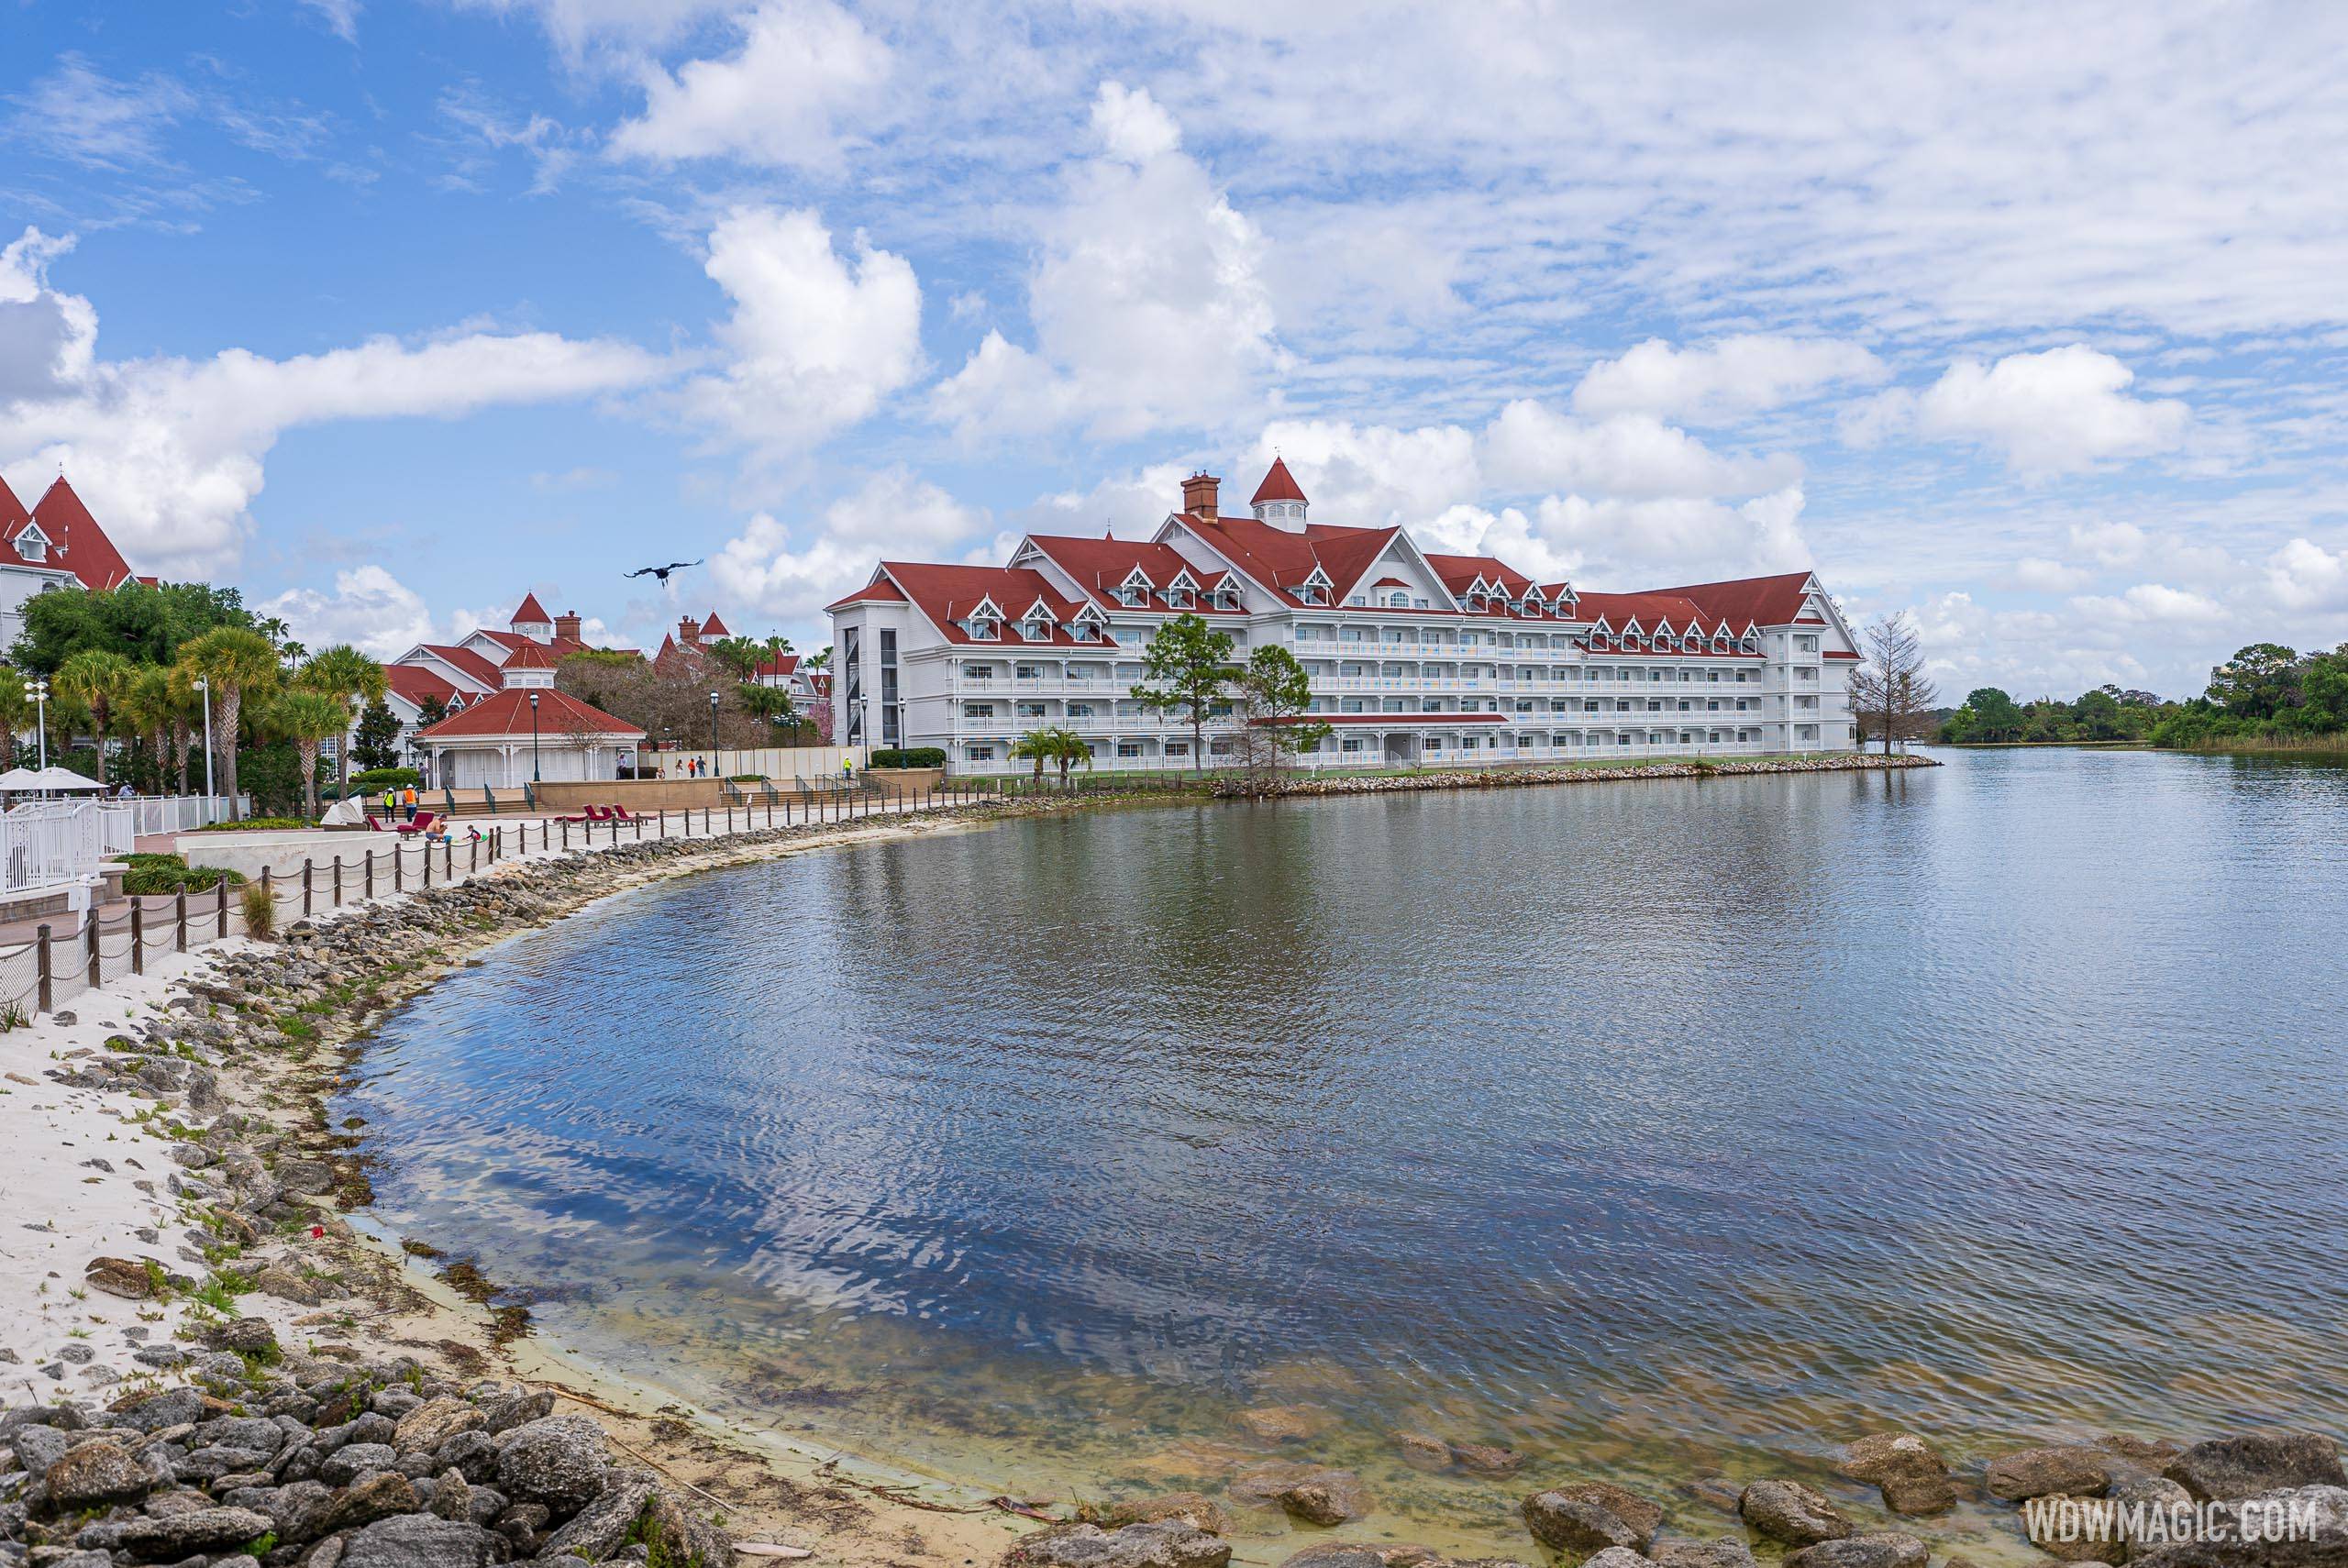 Disney's Grand Floridian Resort is being updated throughout